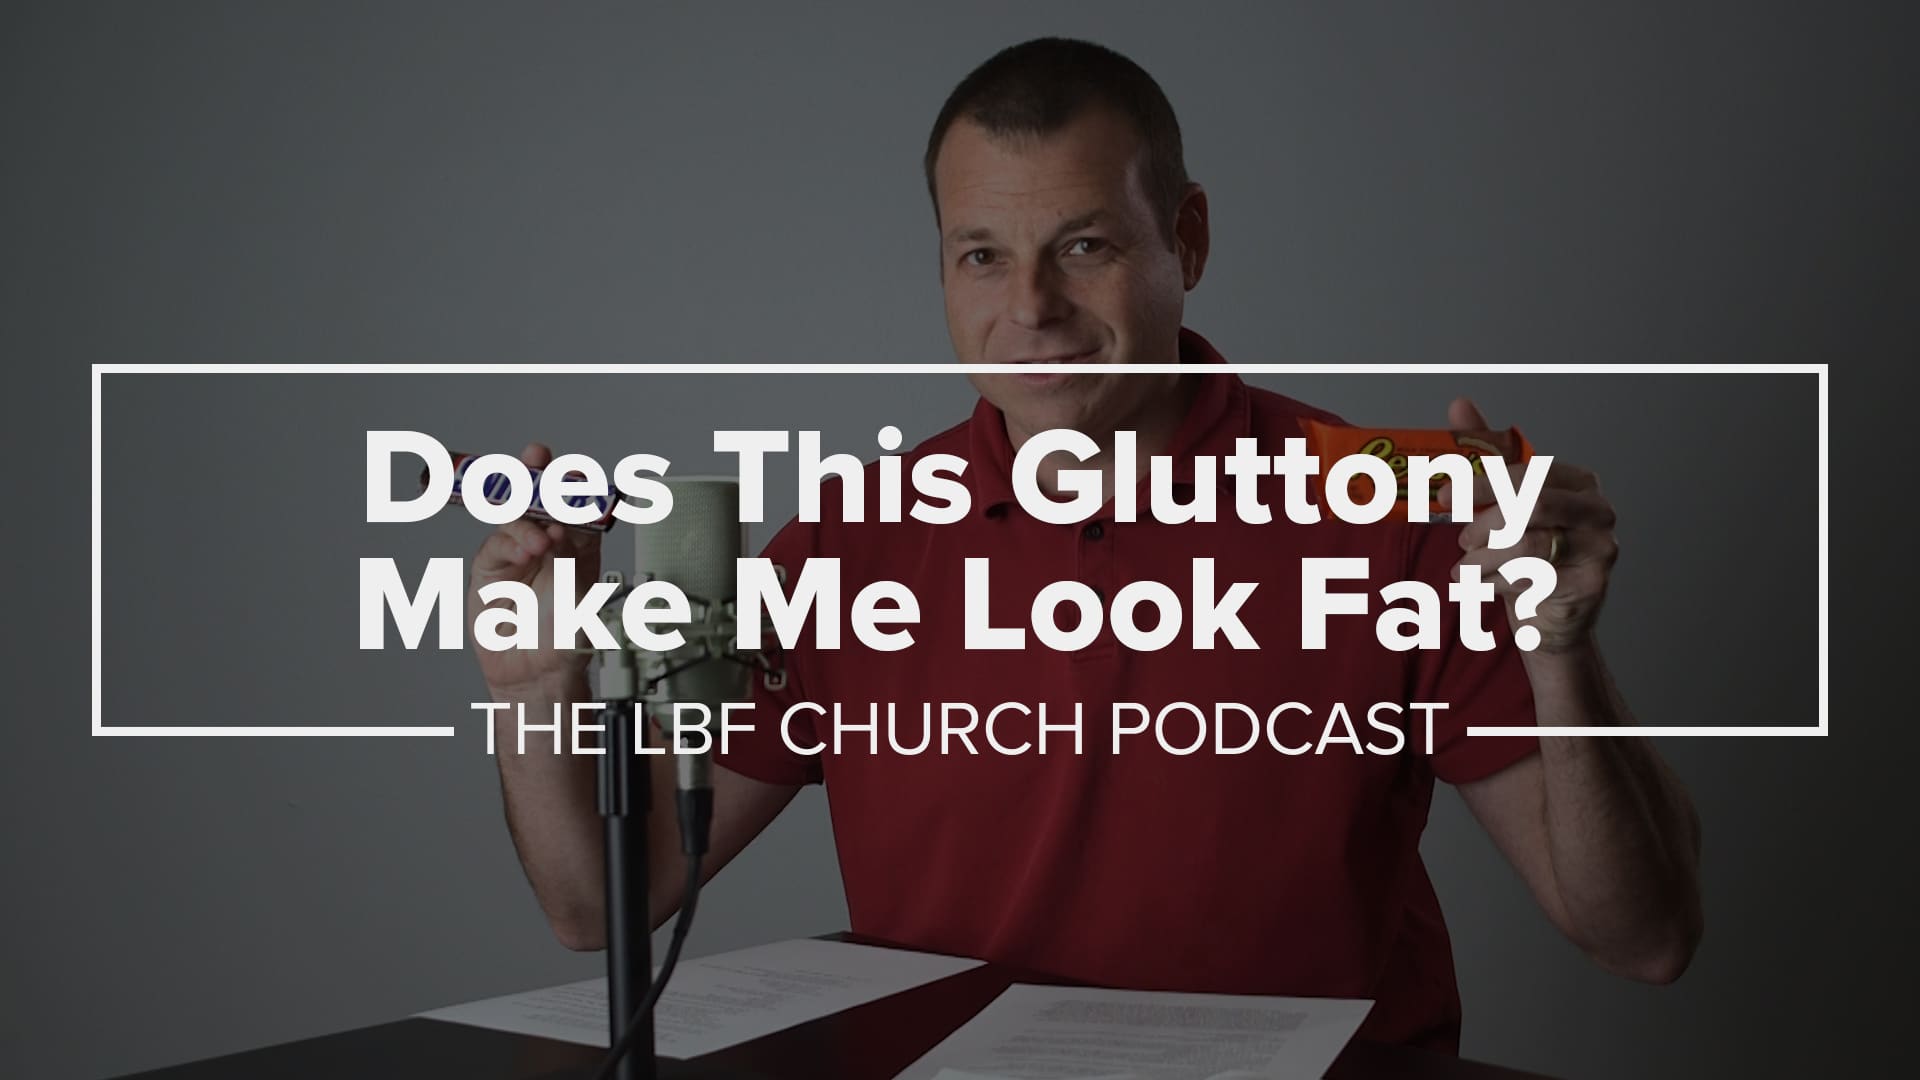 Does this gluttony make me look fat? What is Gluttony?